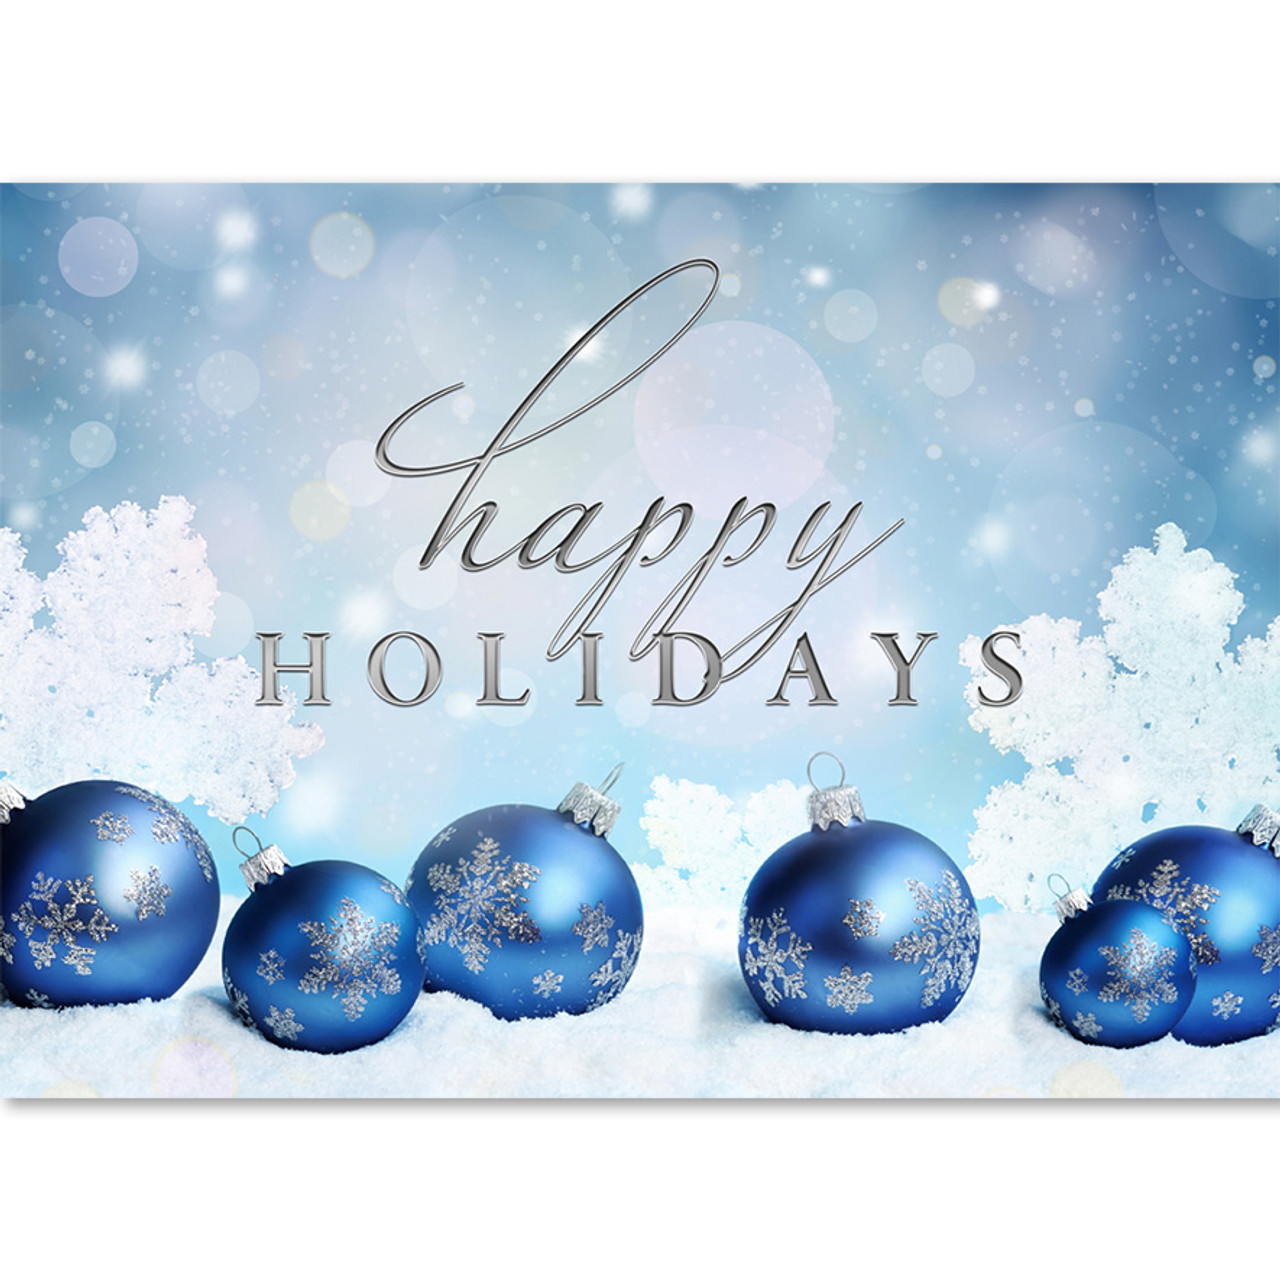 Blue and Silver Ornaments Holiday Card - Business Holiday Cards